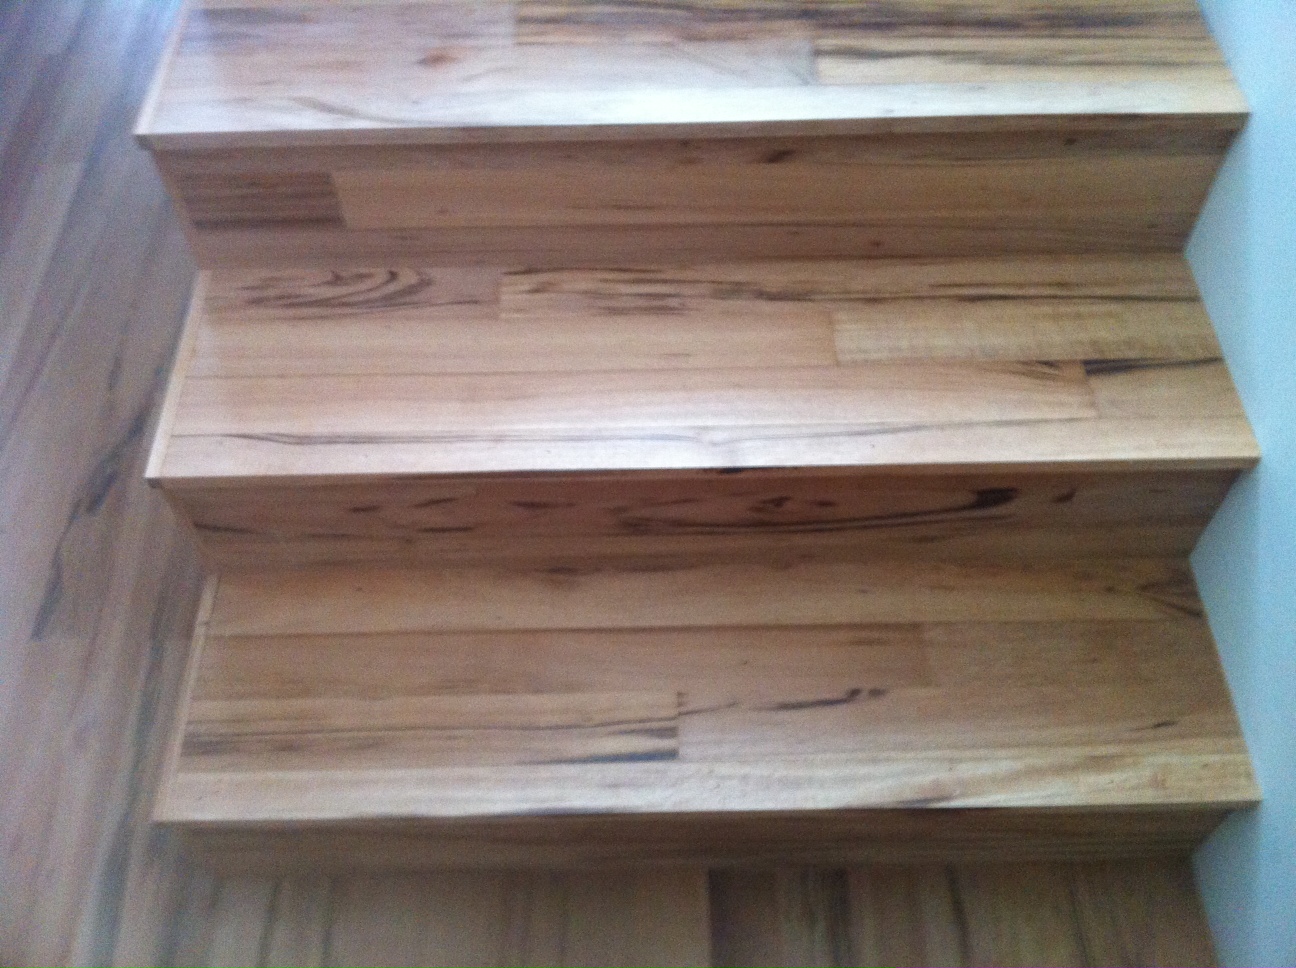 Stair Treads Using Flooring, Can You Use Hardwood Flooring On Stairs